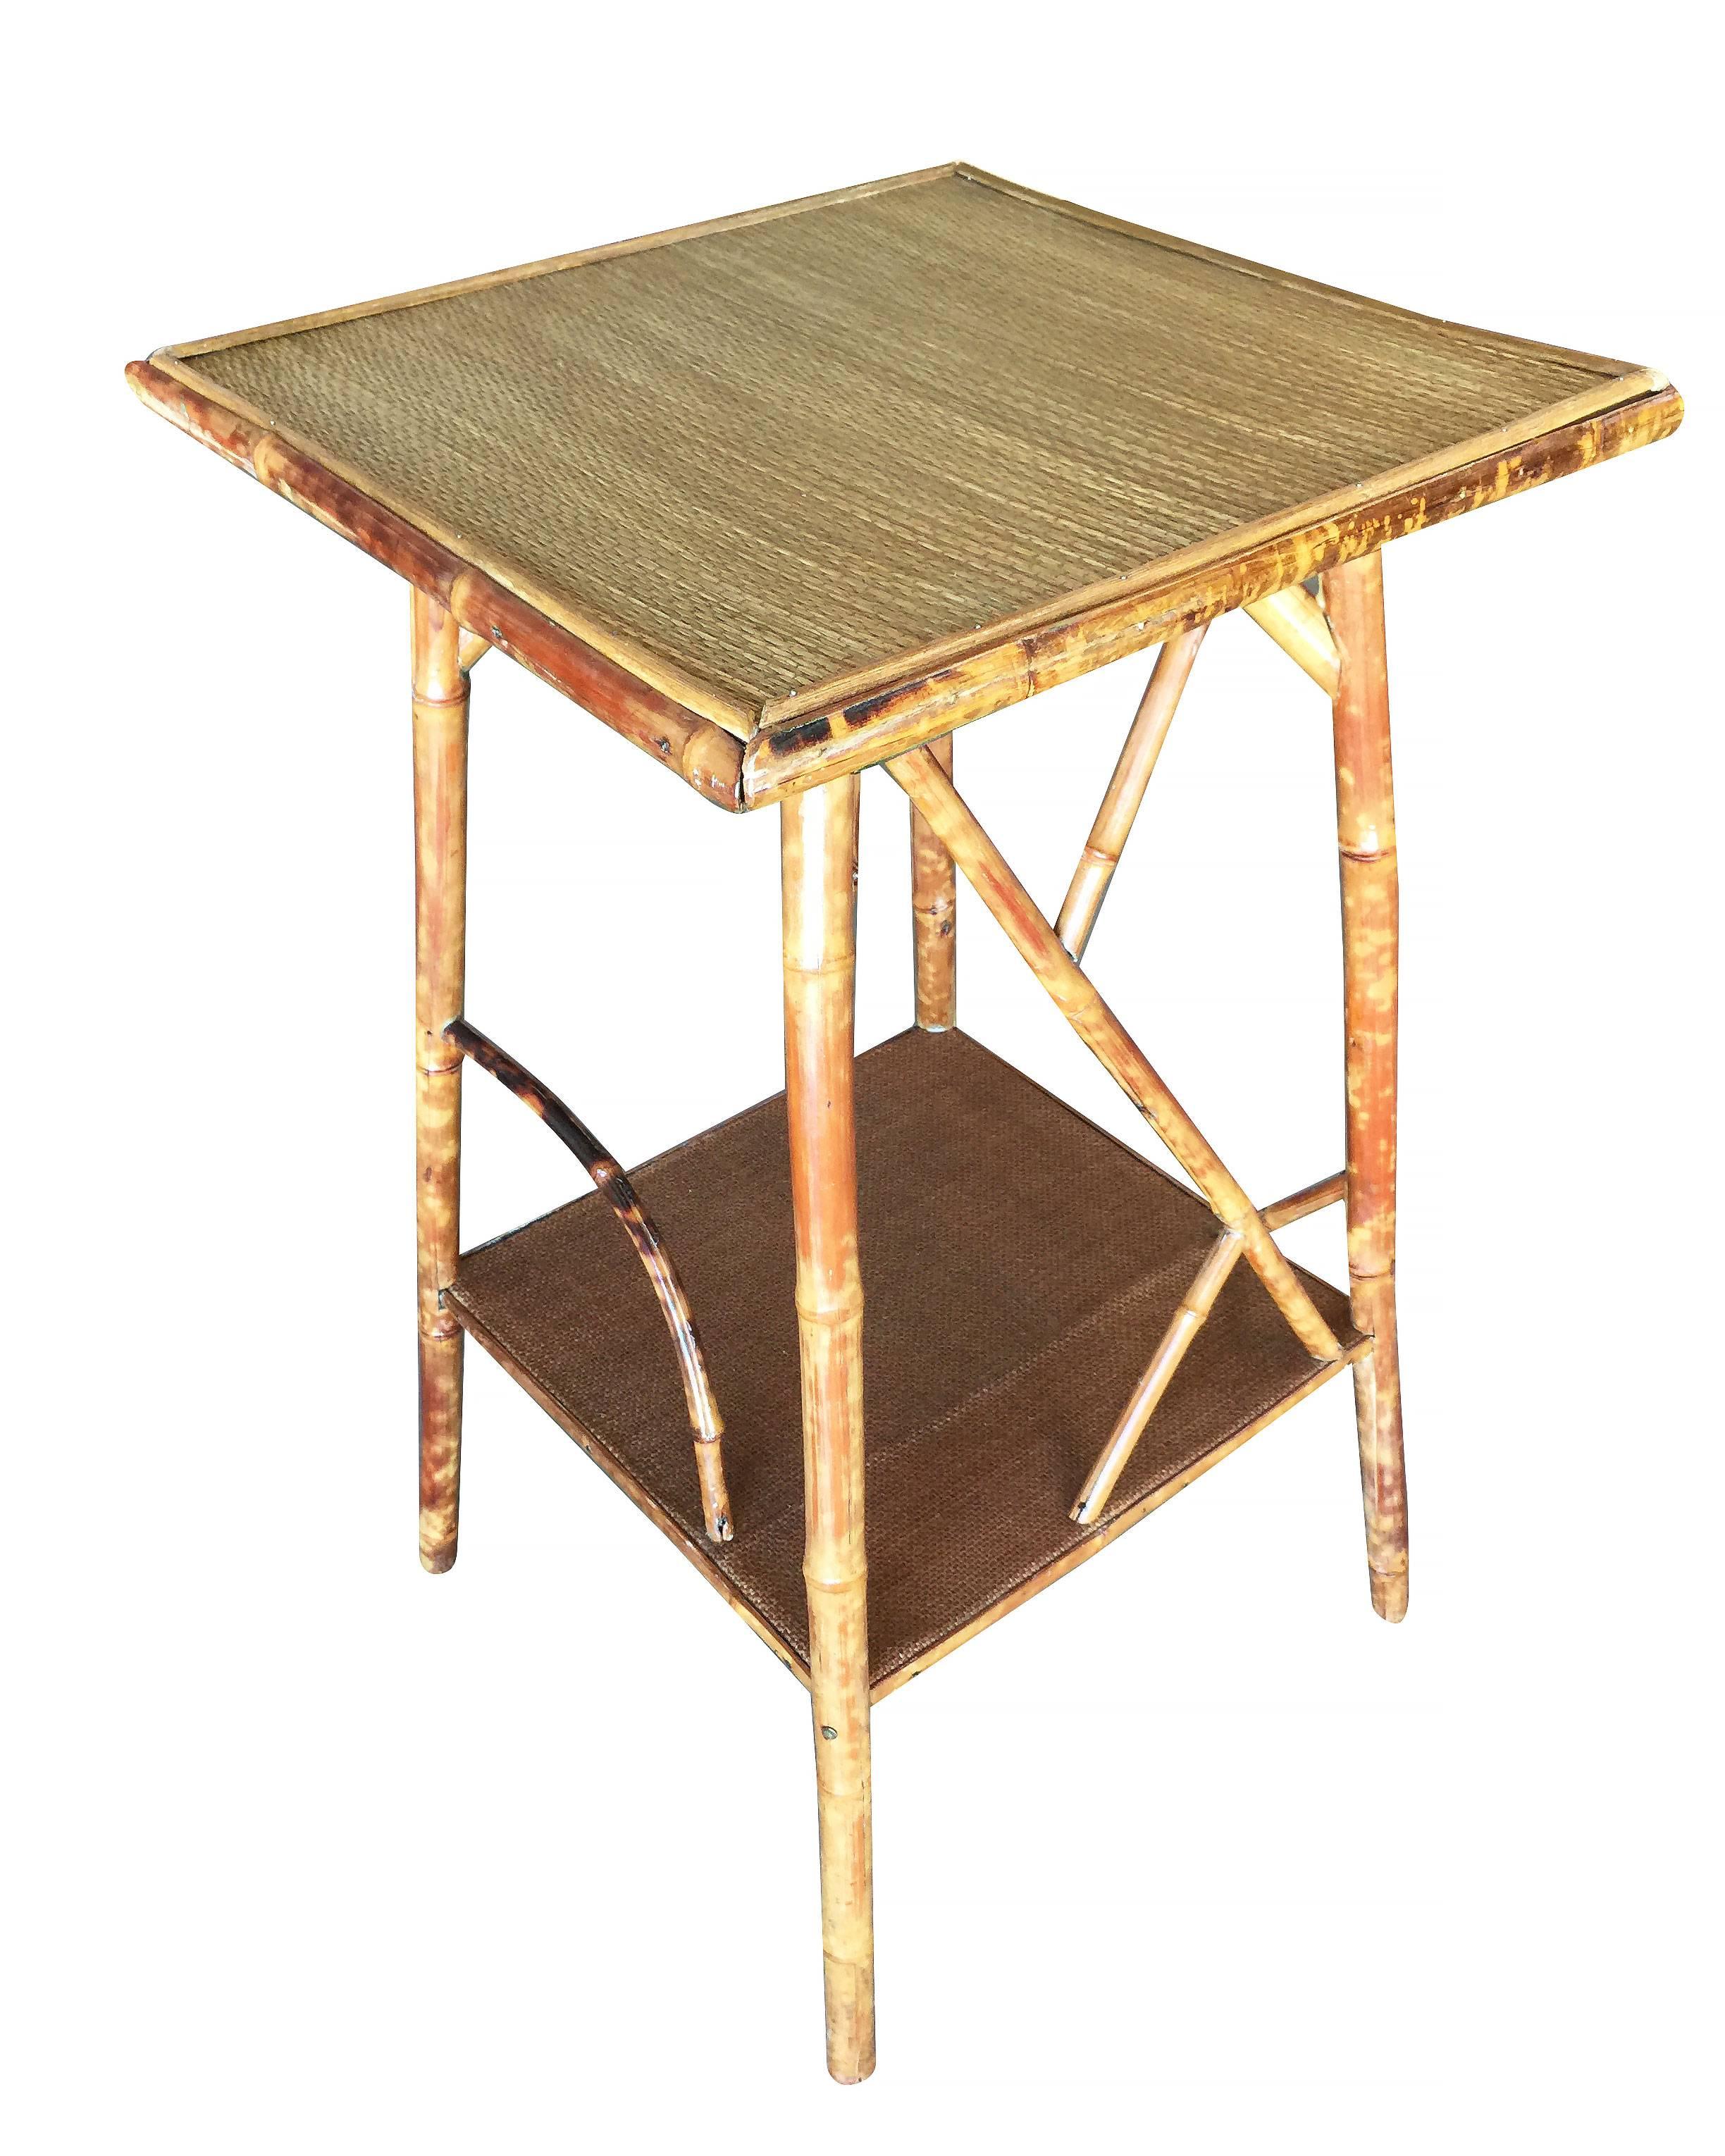 Late Victorian Restored Tiger Bamboo Pedestal Side Table with Organic Formed Accents